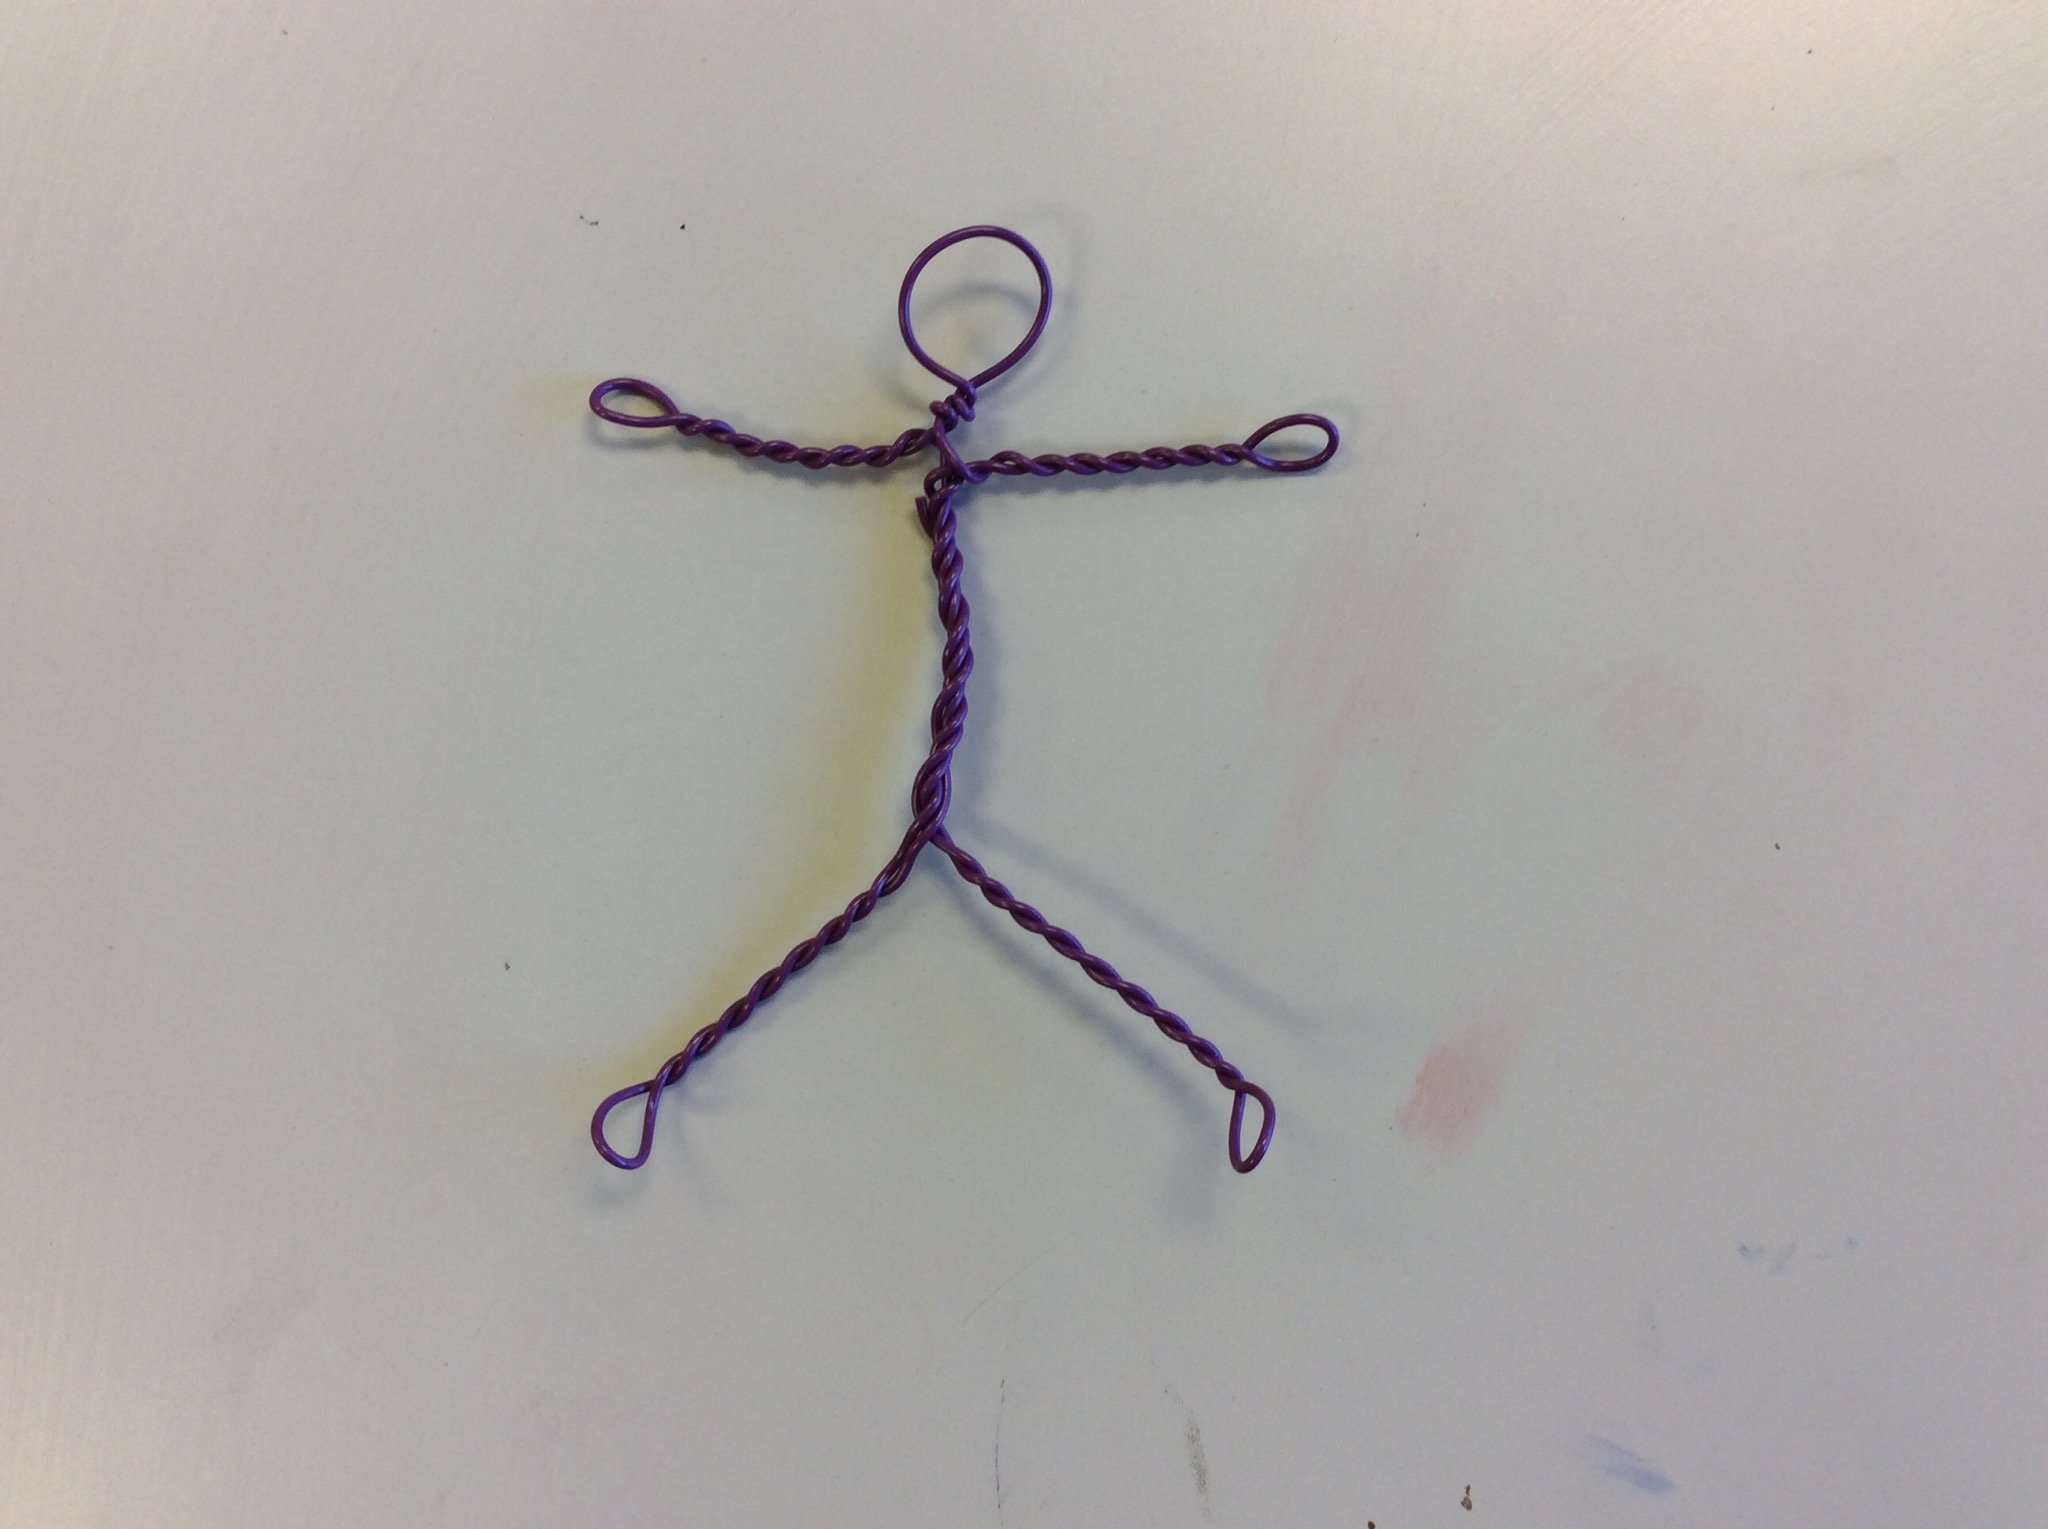 How to Make a Wire Figure 